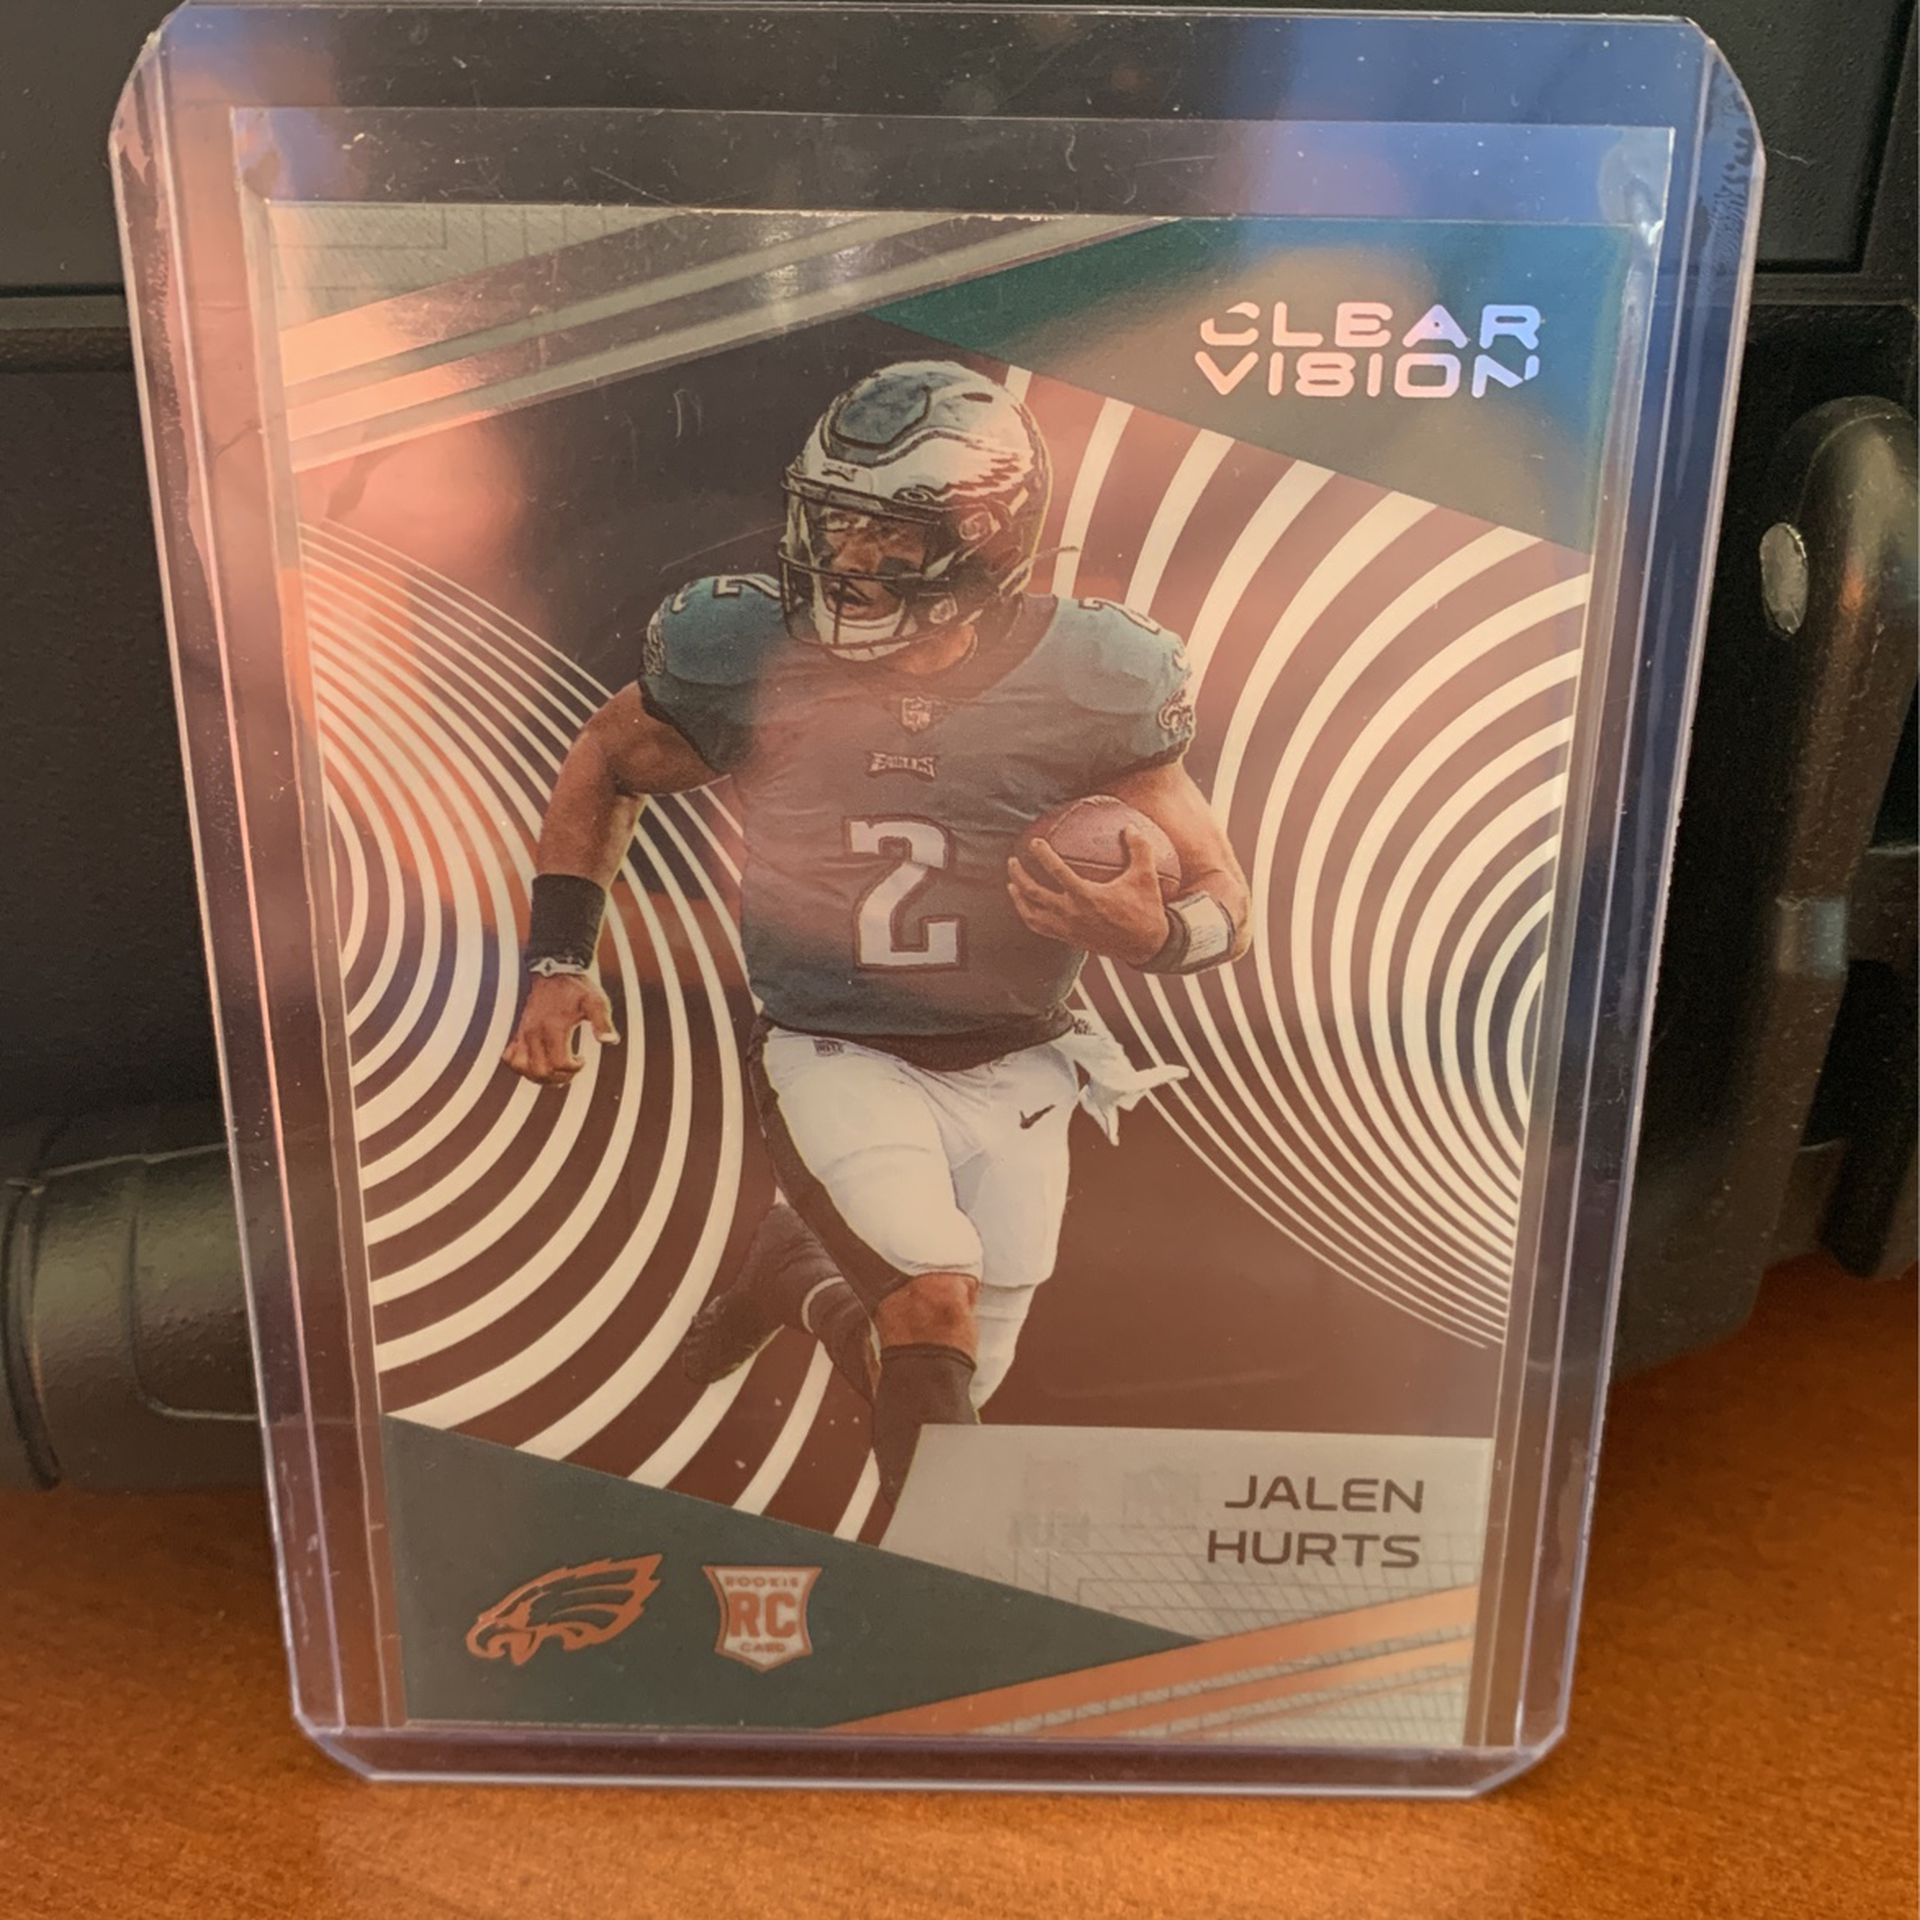 Jalen Hurts Clear Vision Rookie Card 